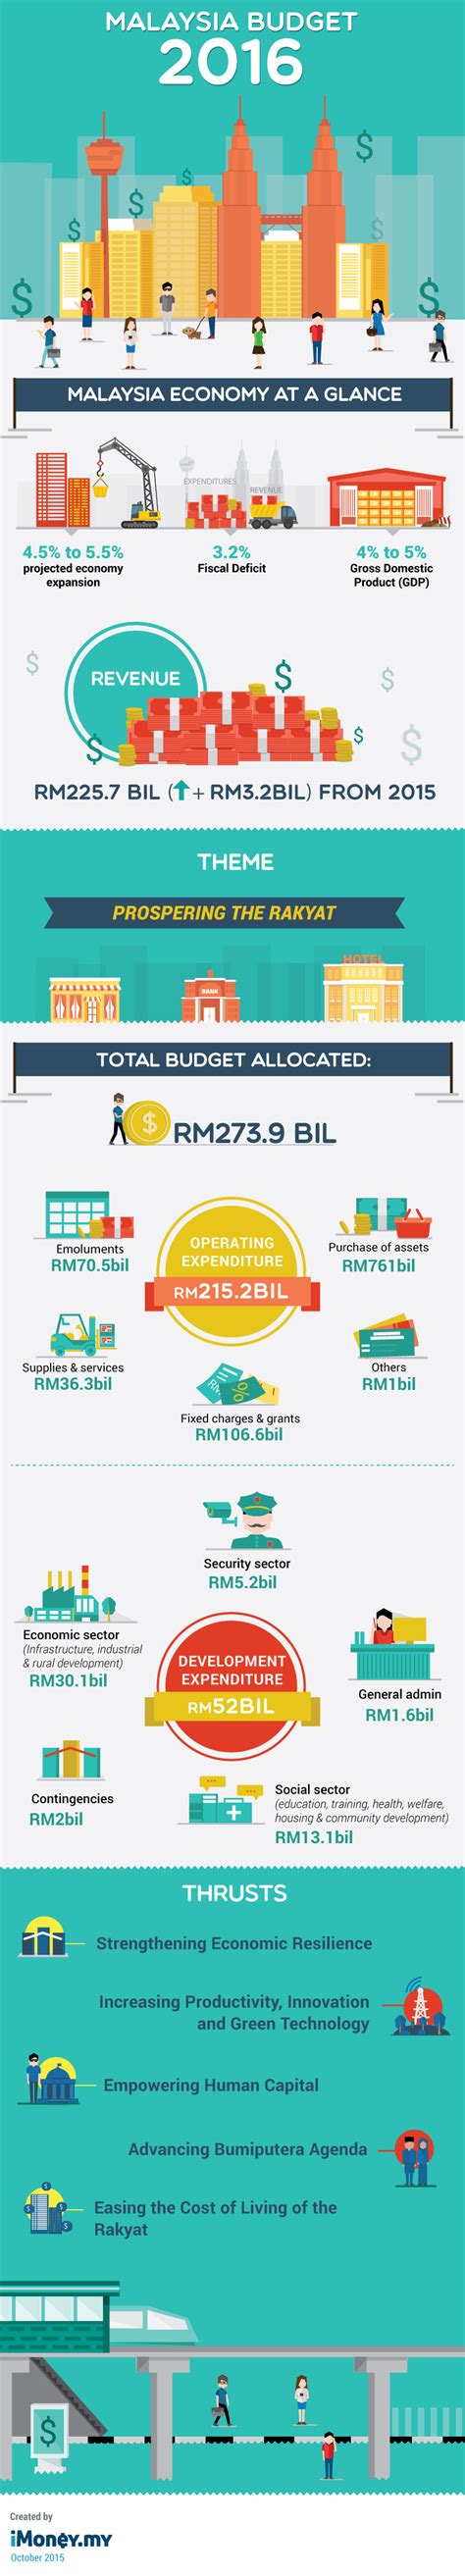 The following is the summary of tax measures for malaysia budget 2018. Malaysia Budget 2016: The Key Highlights [Infographic ...